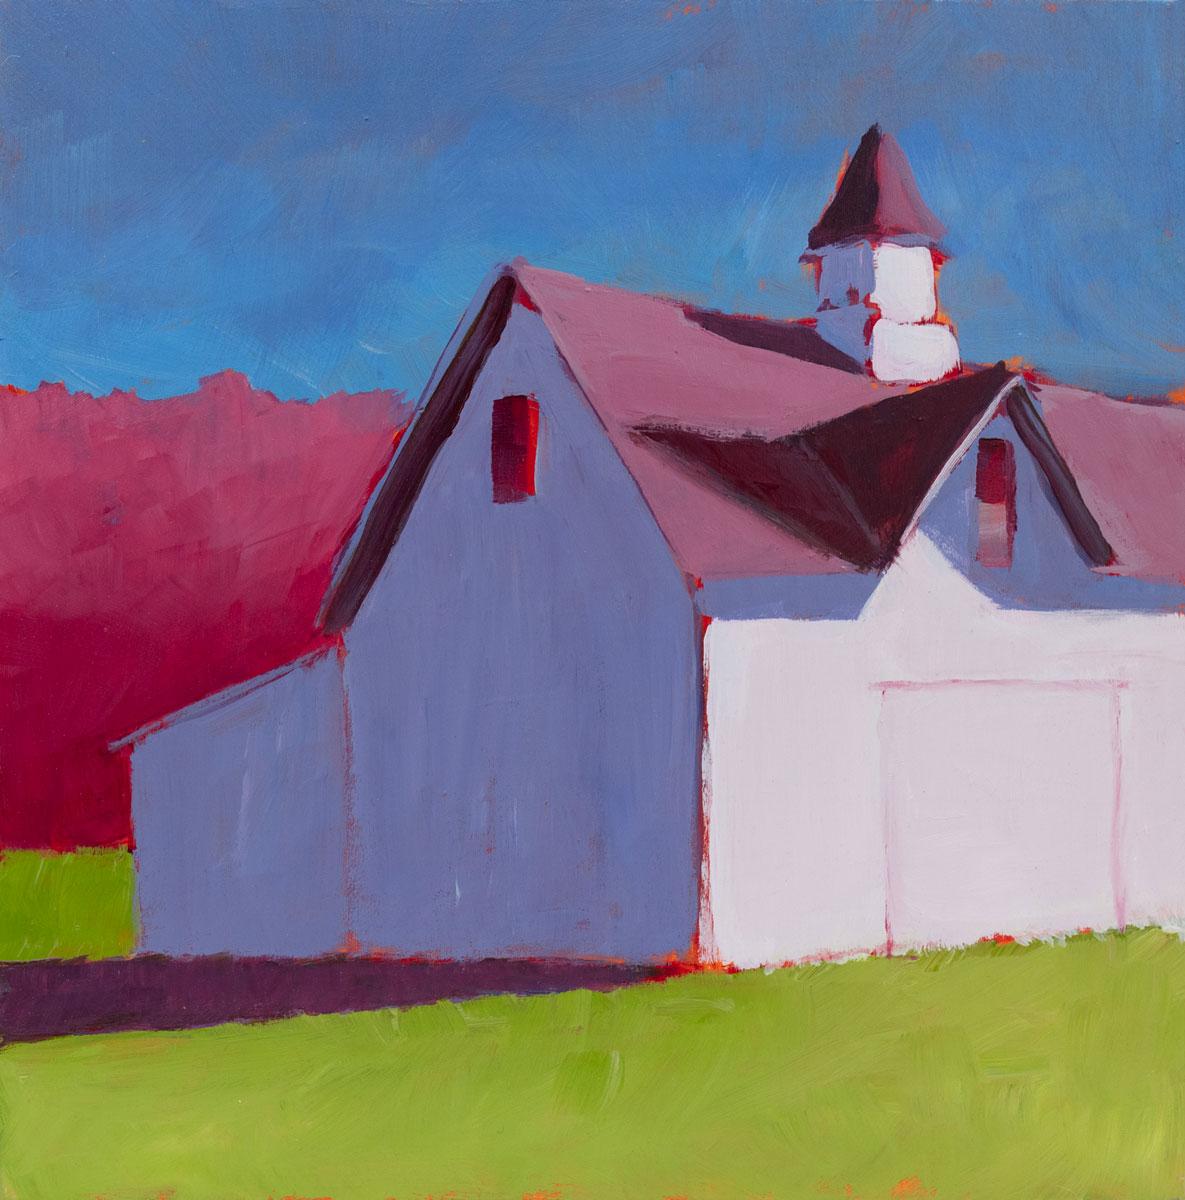 This small contemporary rural landscape painting by Carol Young features a lightly abstracted scene of a barn and a contrasting blue, green, and red palette. The painting is broken into simplified planes of color, capturing the warmth of the sun